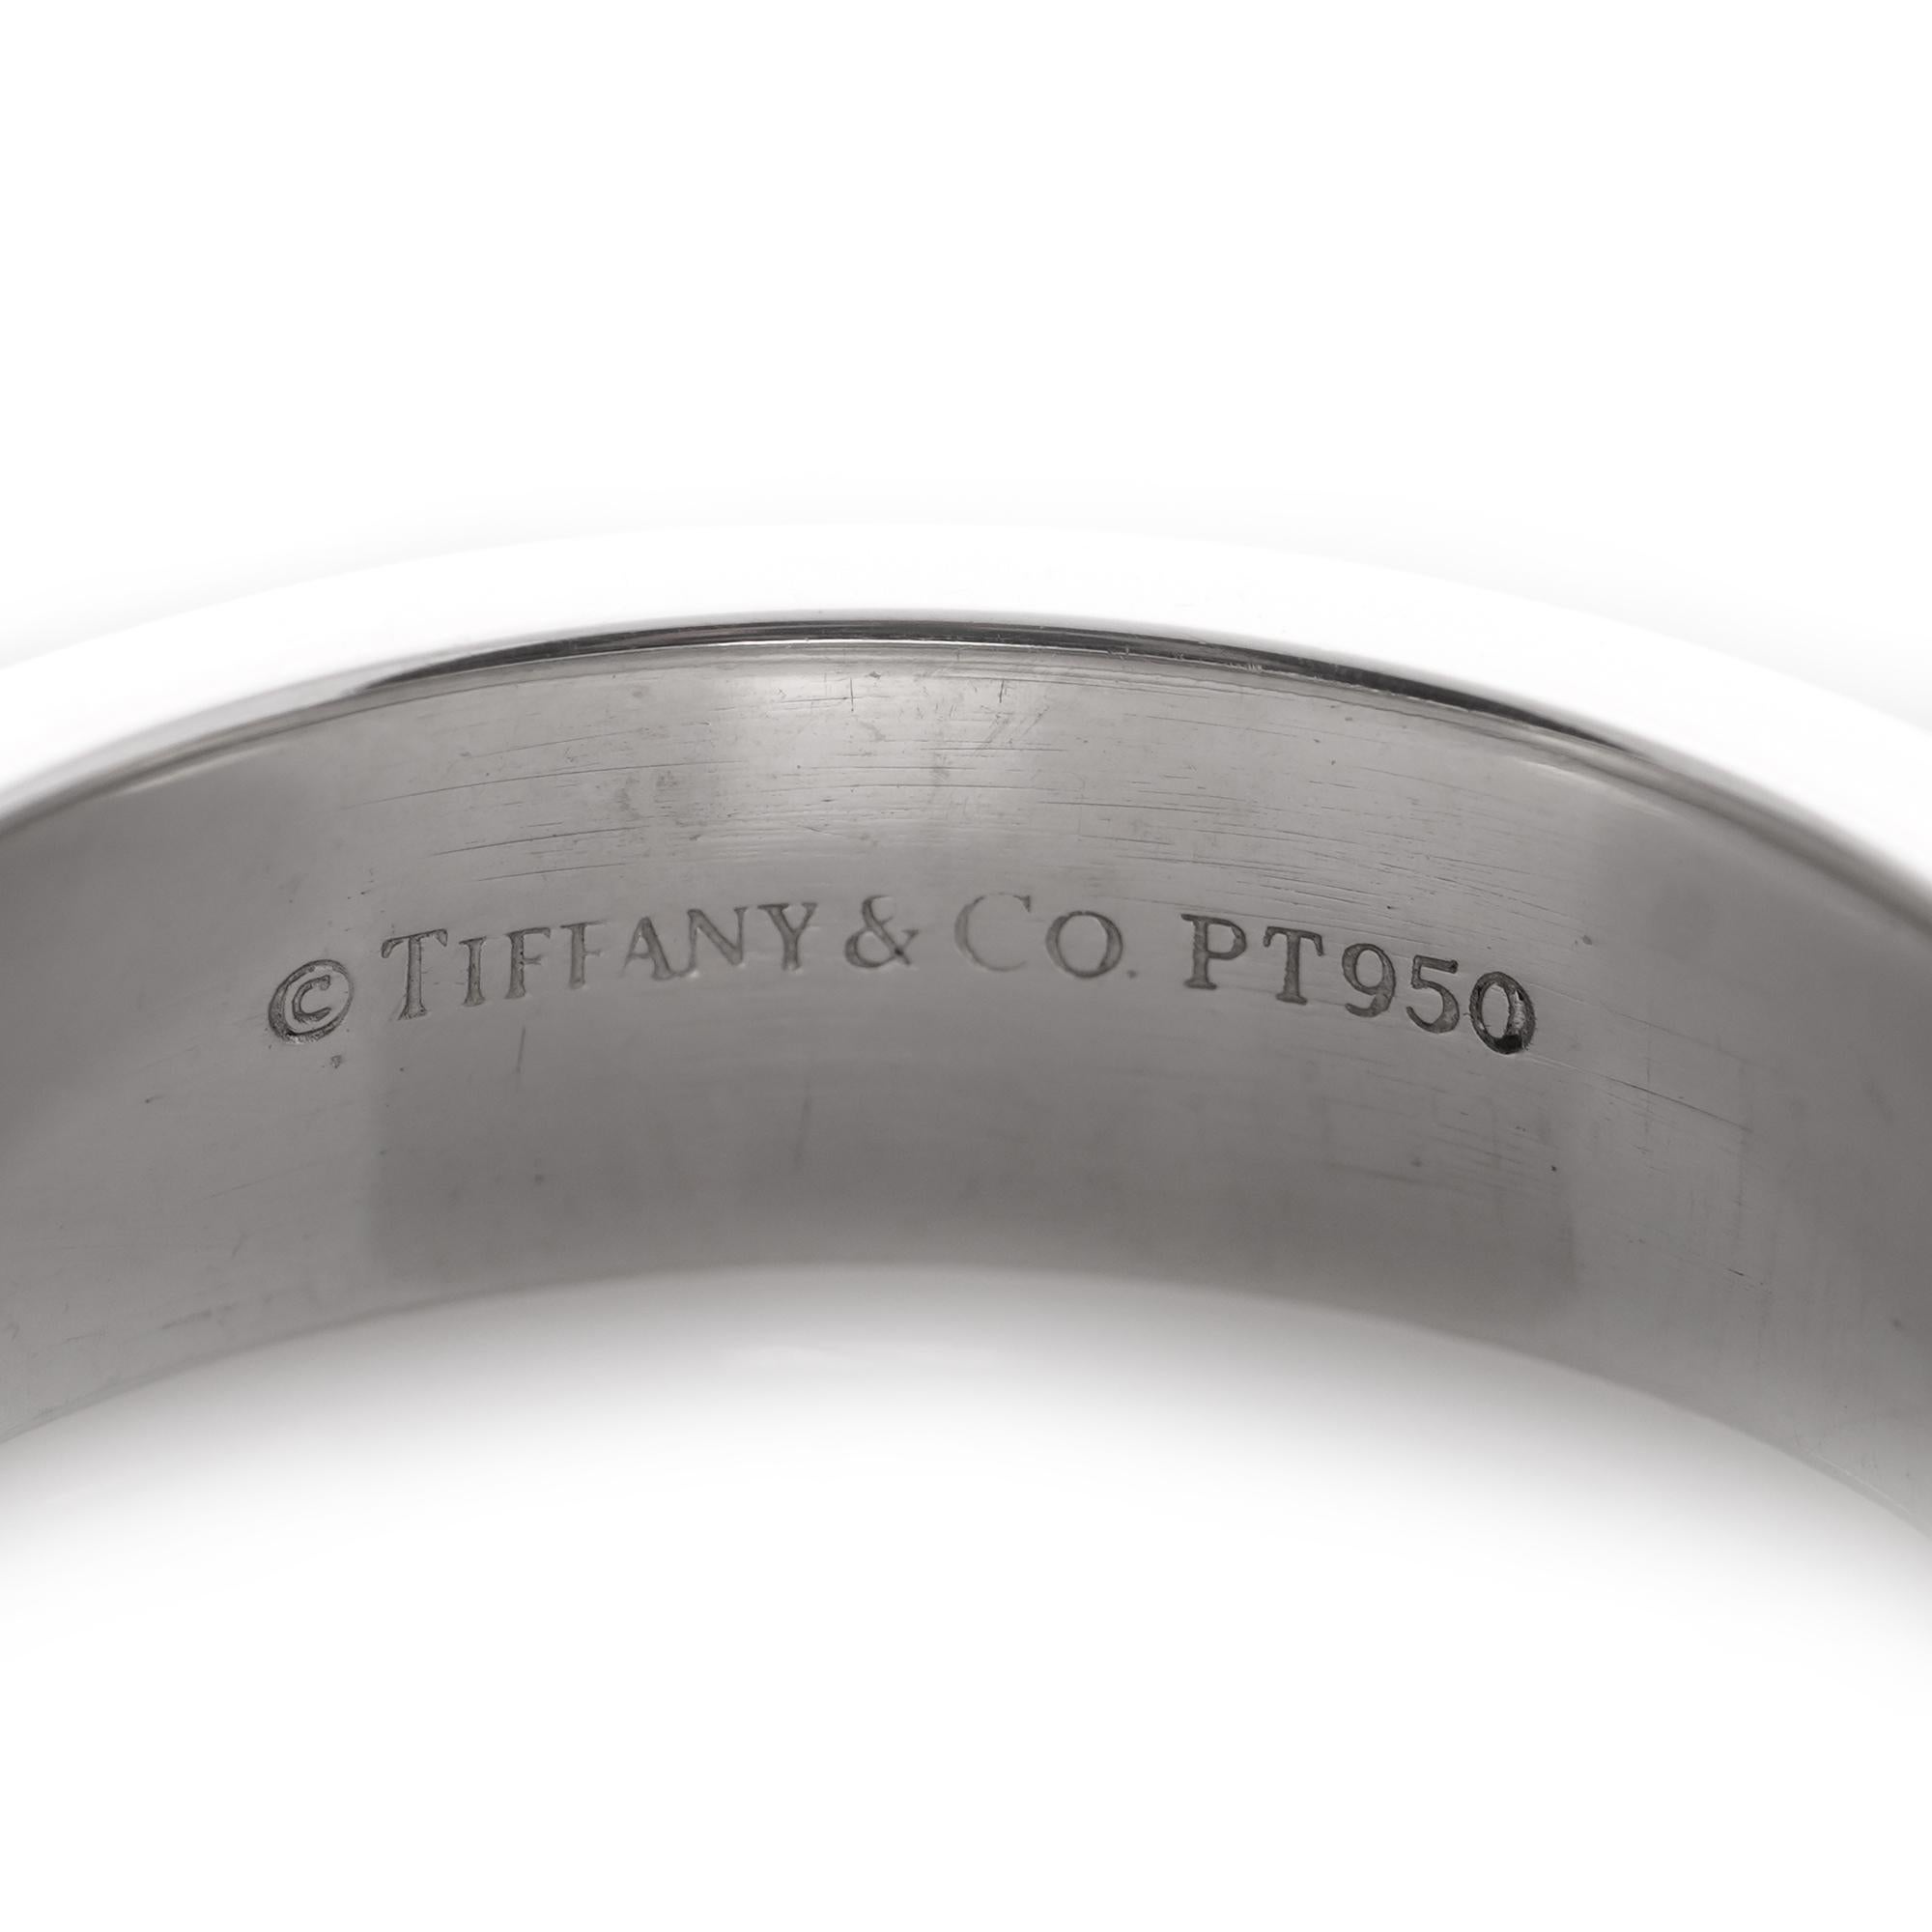 Tiffany & Co. 950 Platinum Mill grain Wedding Ring Bands Set for Him and Her In Excellent Condition For Sale In Braintree, GB